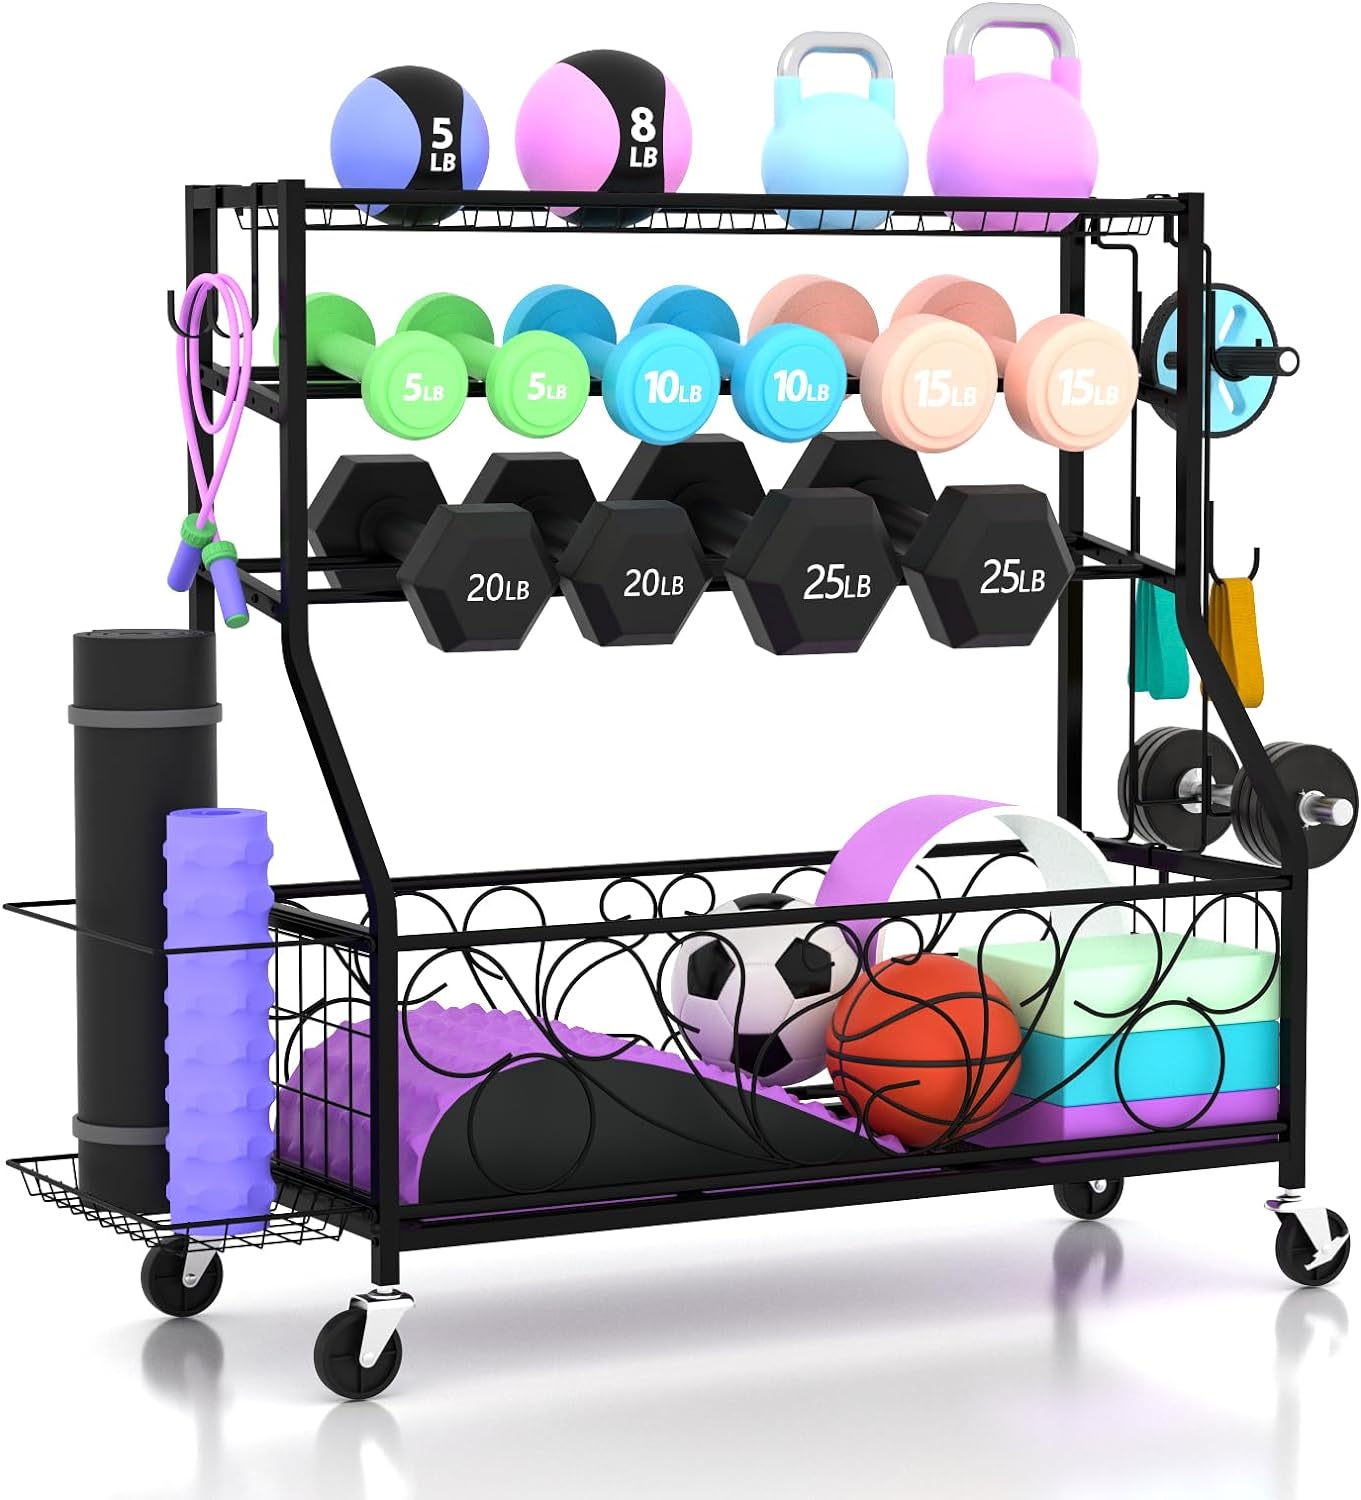 Likein Weight Rack for Dumbbells,Yoga Mat Storage Rack,Home Gym Storage for Dumbbells Kettlebells Foam Roller and Resistance Bands,Workout Storage Organizer